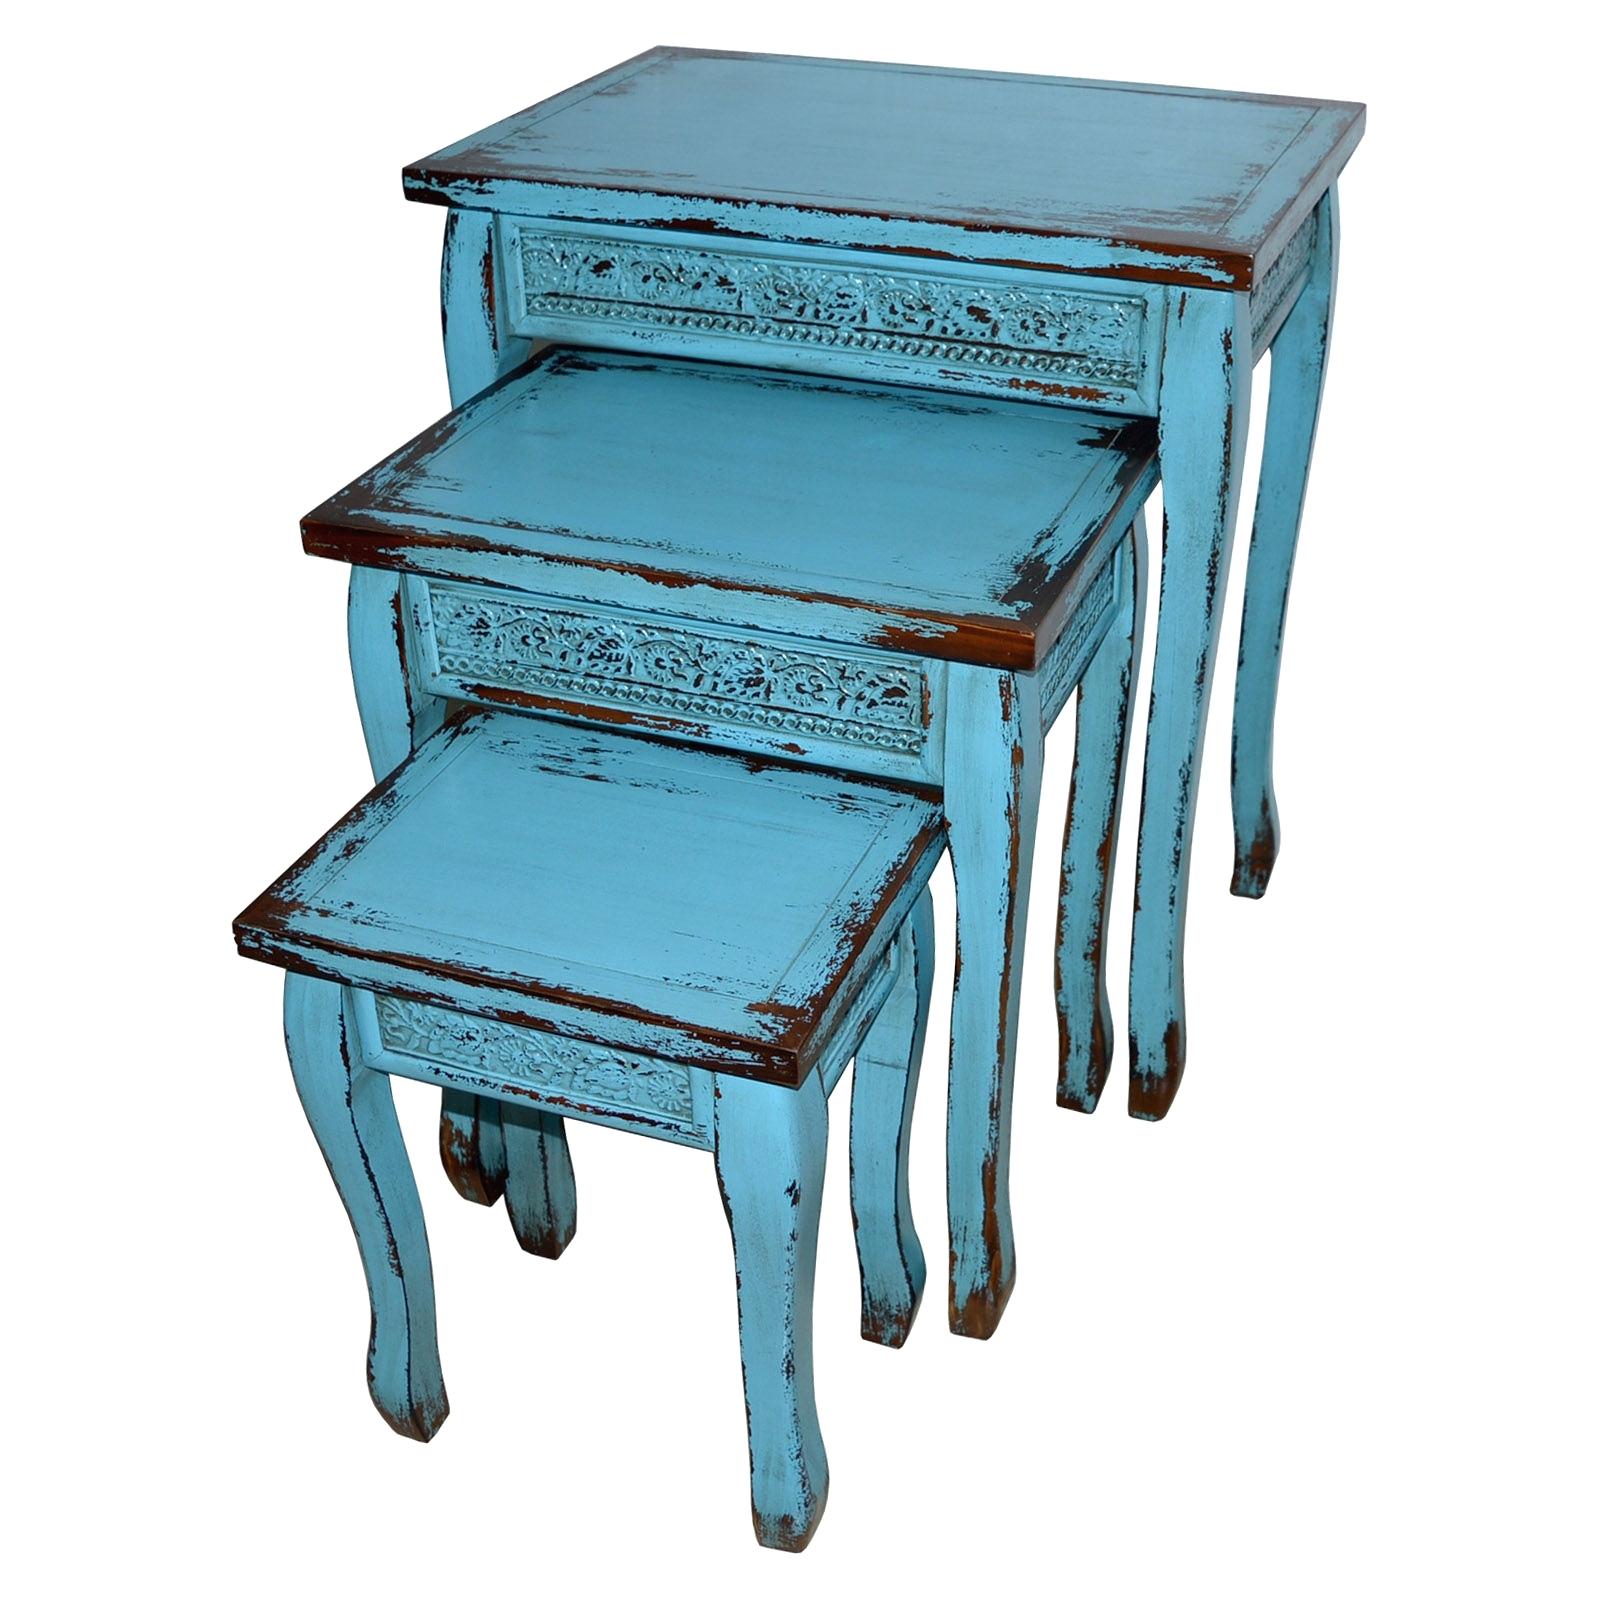 turquoise accent table jjaglo blue wooden distressed side large modern teal laminate paint inch high nightstand small mirrored custom dining tables ikea black cube storage garden